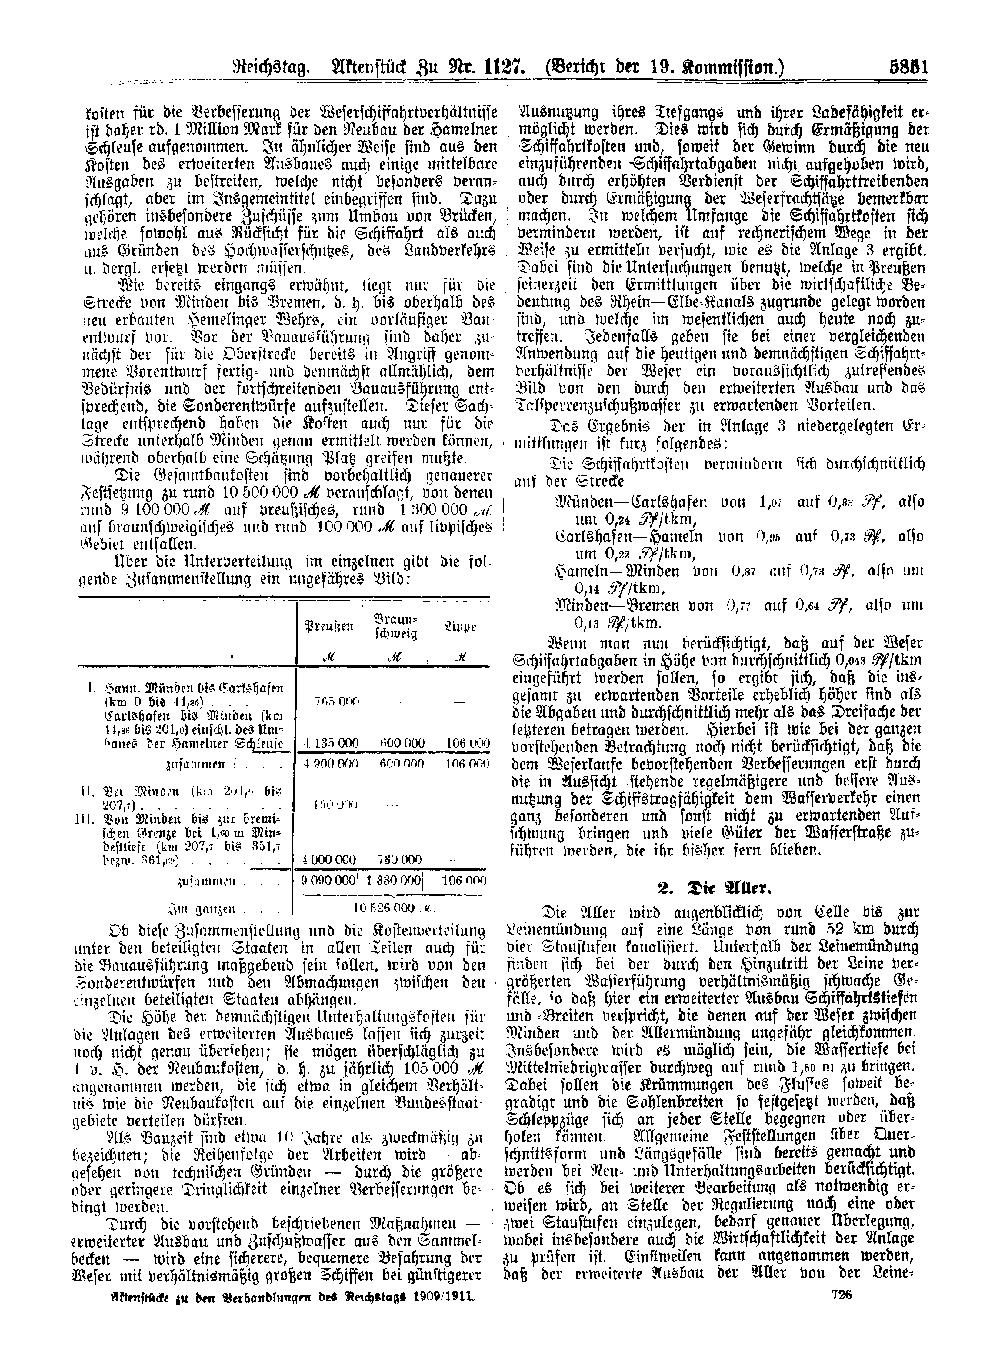 Scan of page 5851